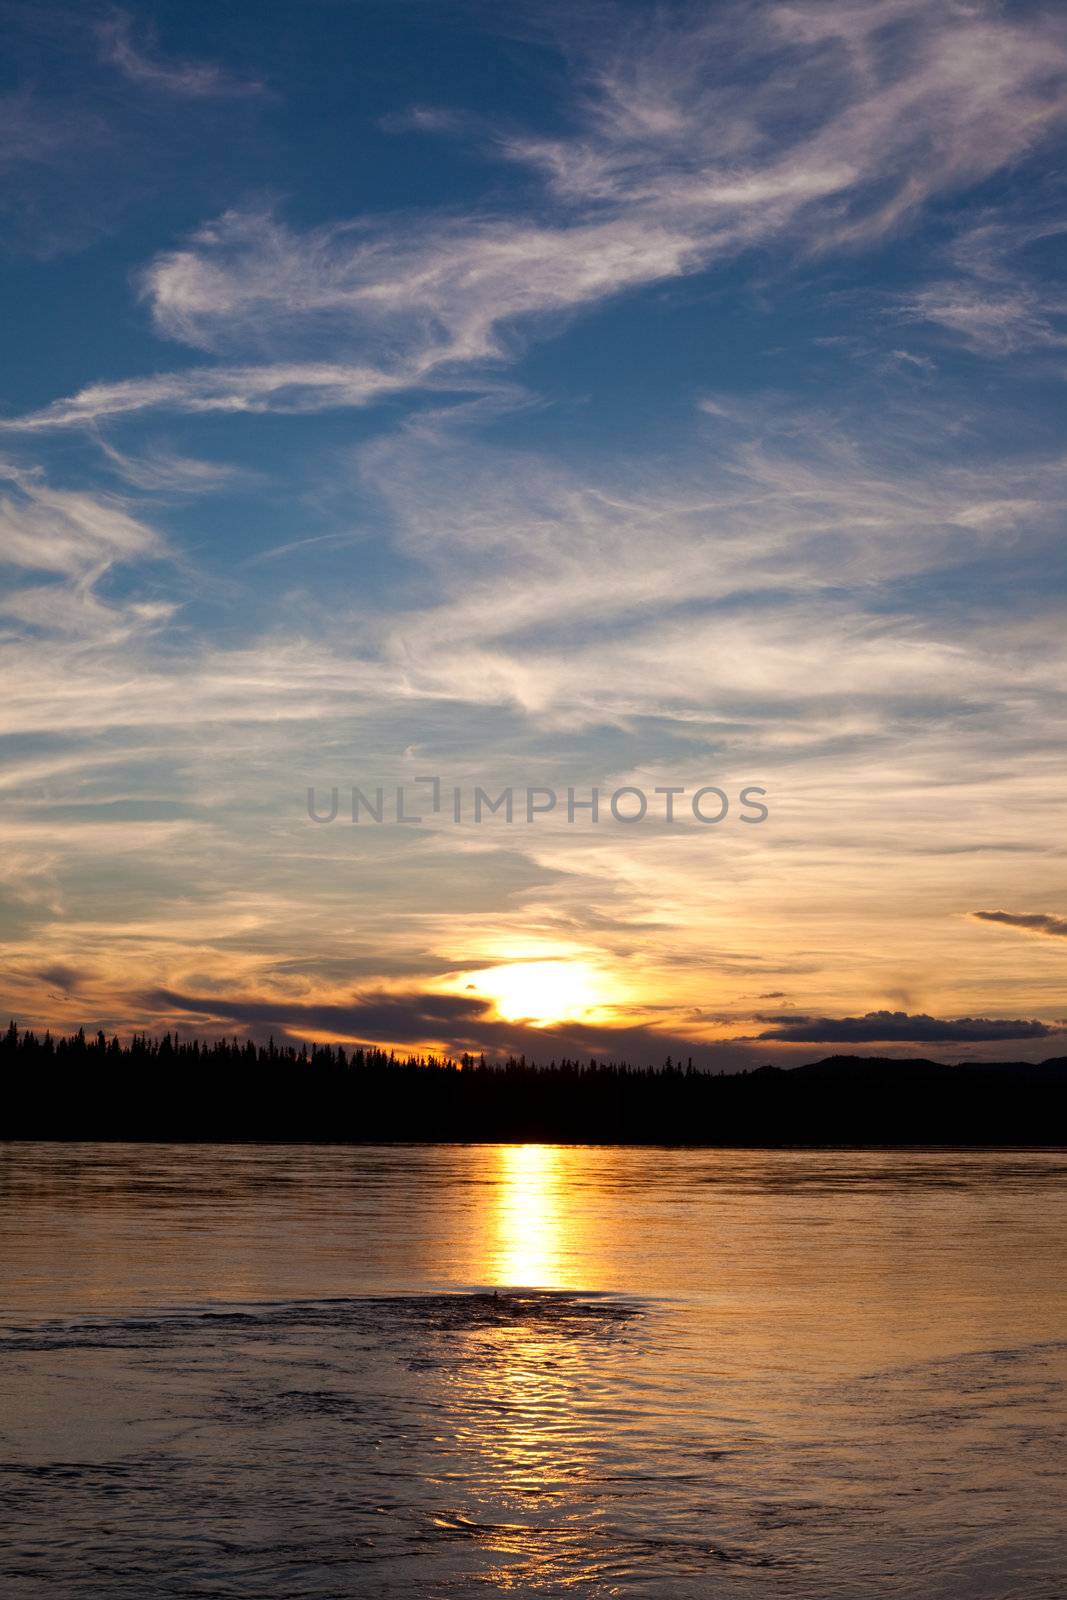 Sunset at Yukon River, Canada by PiLens